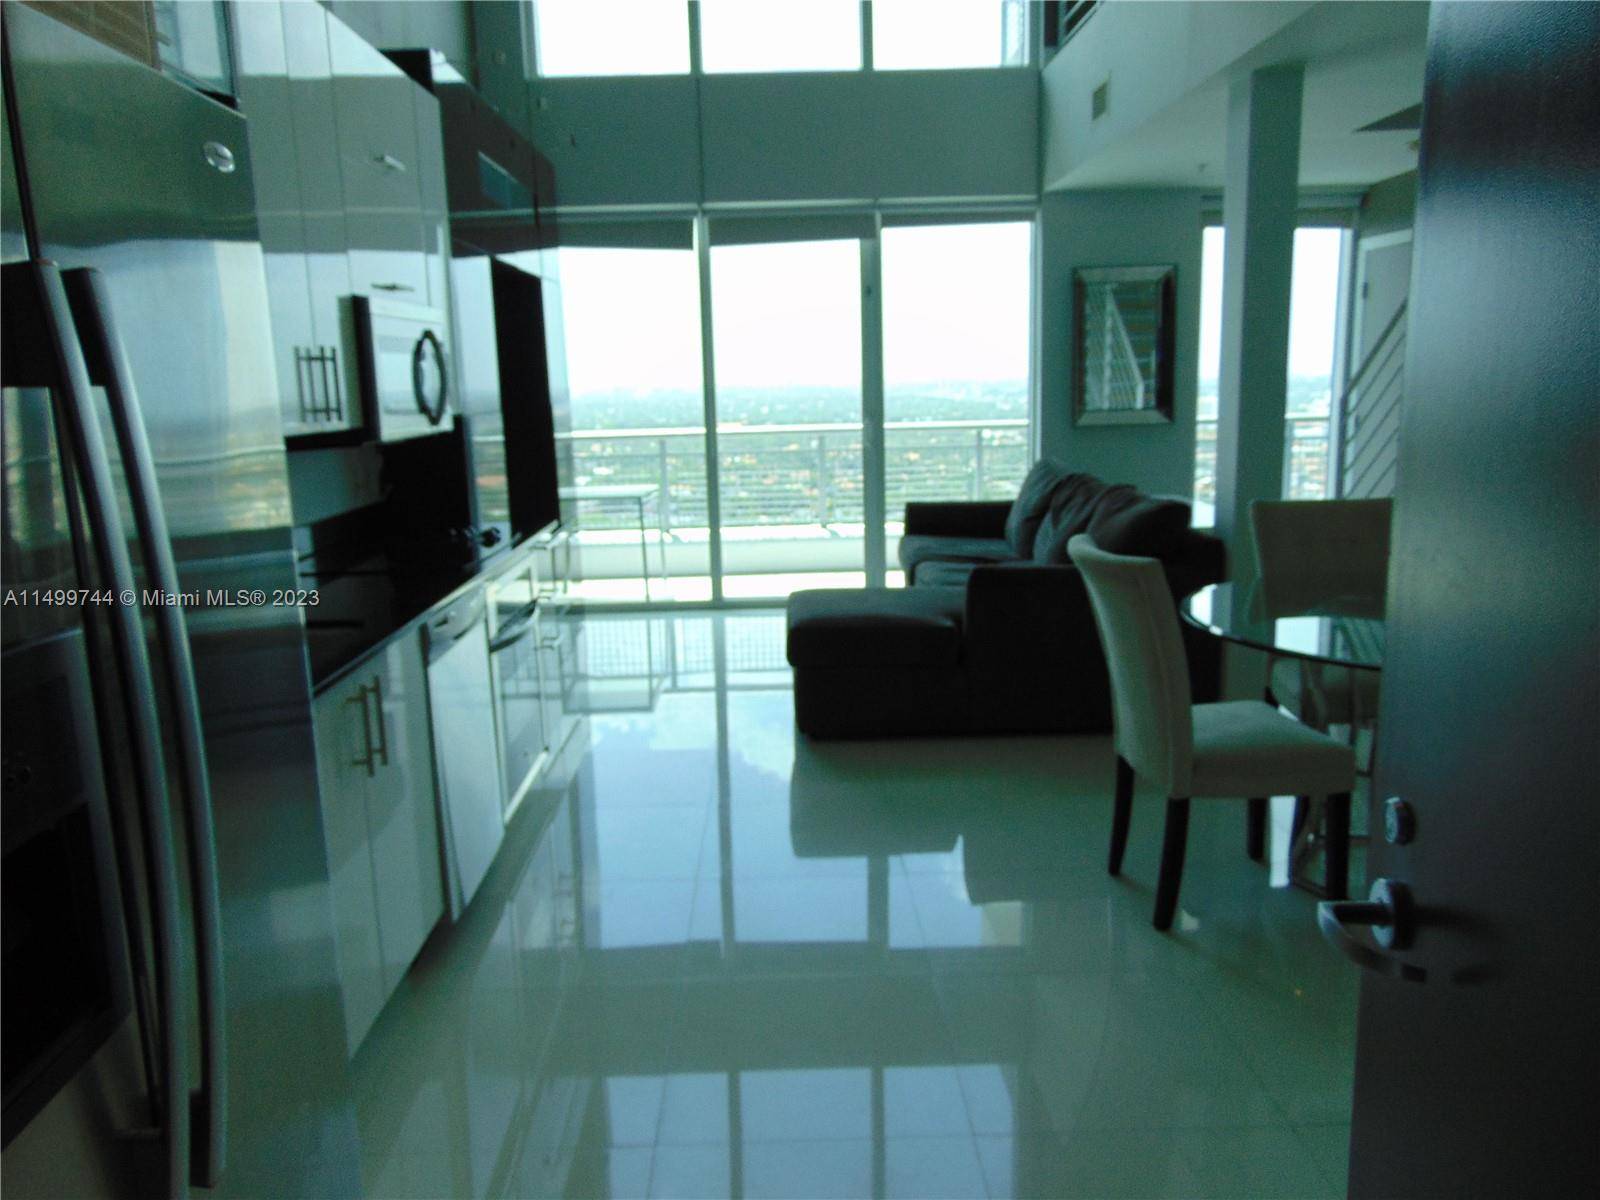 Amazing 2 story loft, 1 bed 2 full baths in high rise with spectacular views.